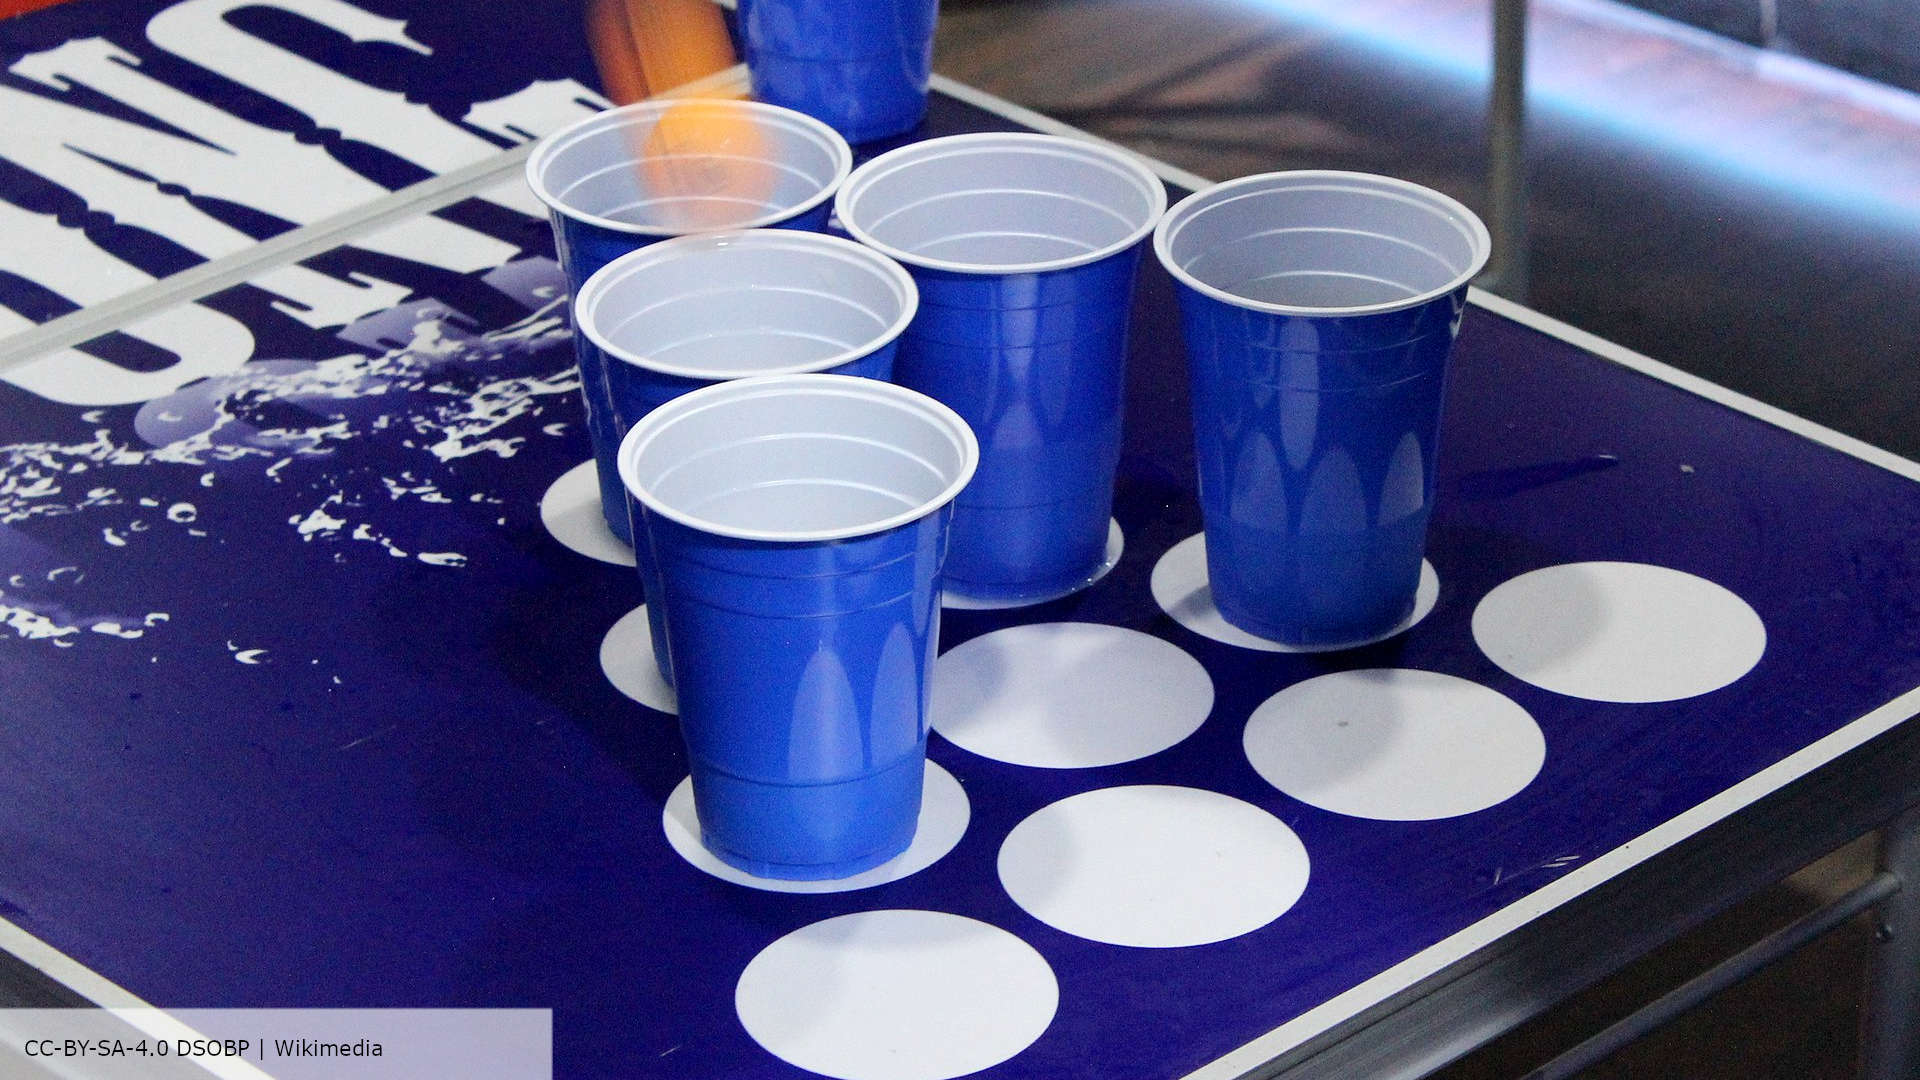 Beer Pong: The rules, set-up and tips to win the game